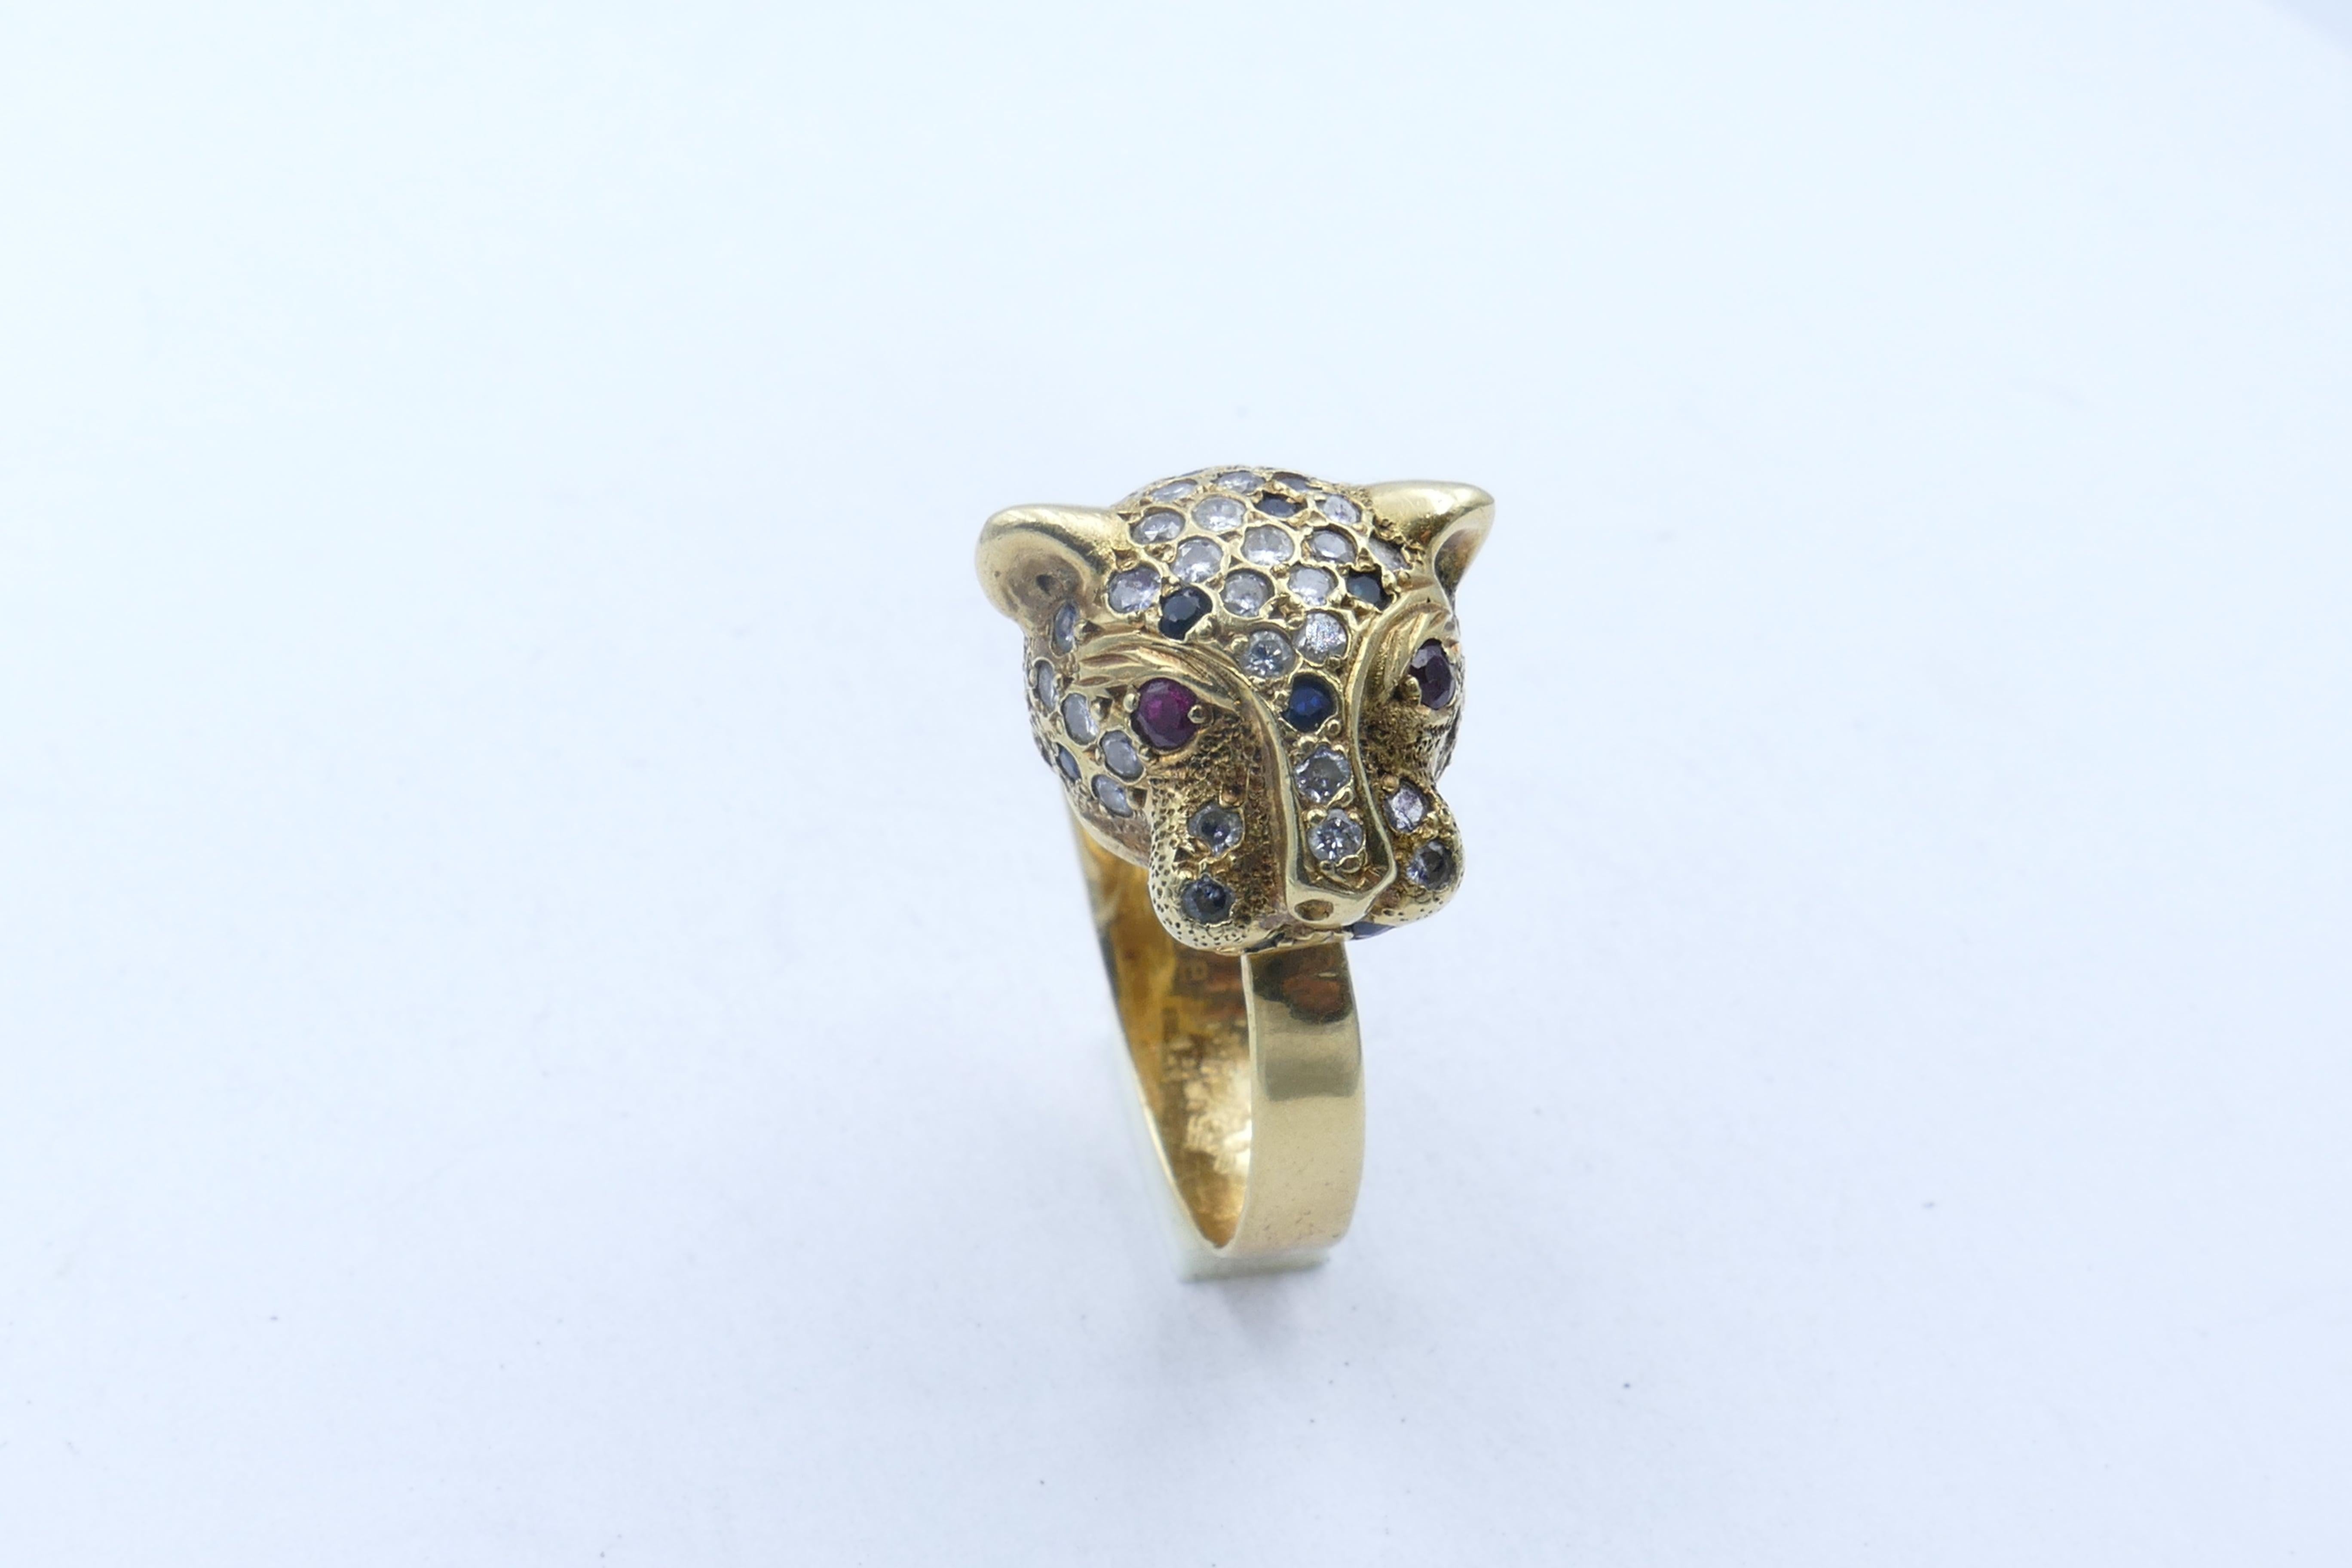 WOW! What a fabulous 'Duchess of Windsor' look-alike Ring this gorgeous piece of Animal Jewellery is!
Set in 18ct Yellow Gold with eyes of quality Rubies, & scattered over the head & neck are Sapphires & Diamonds, it certainly makes an impact.
The